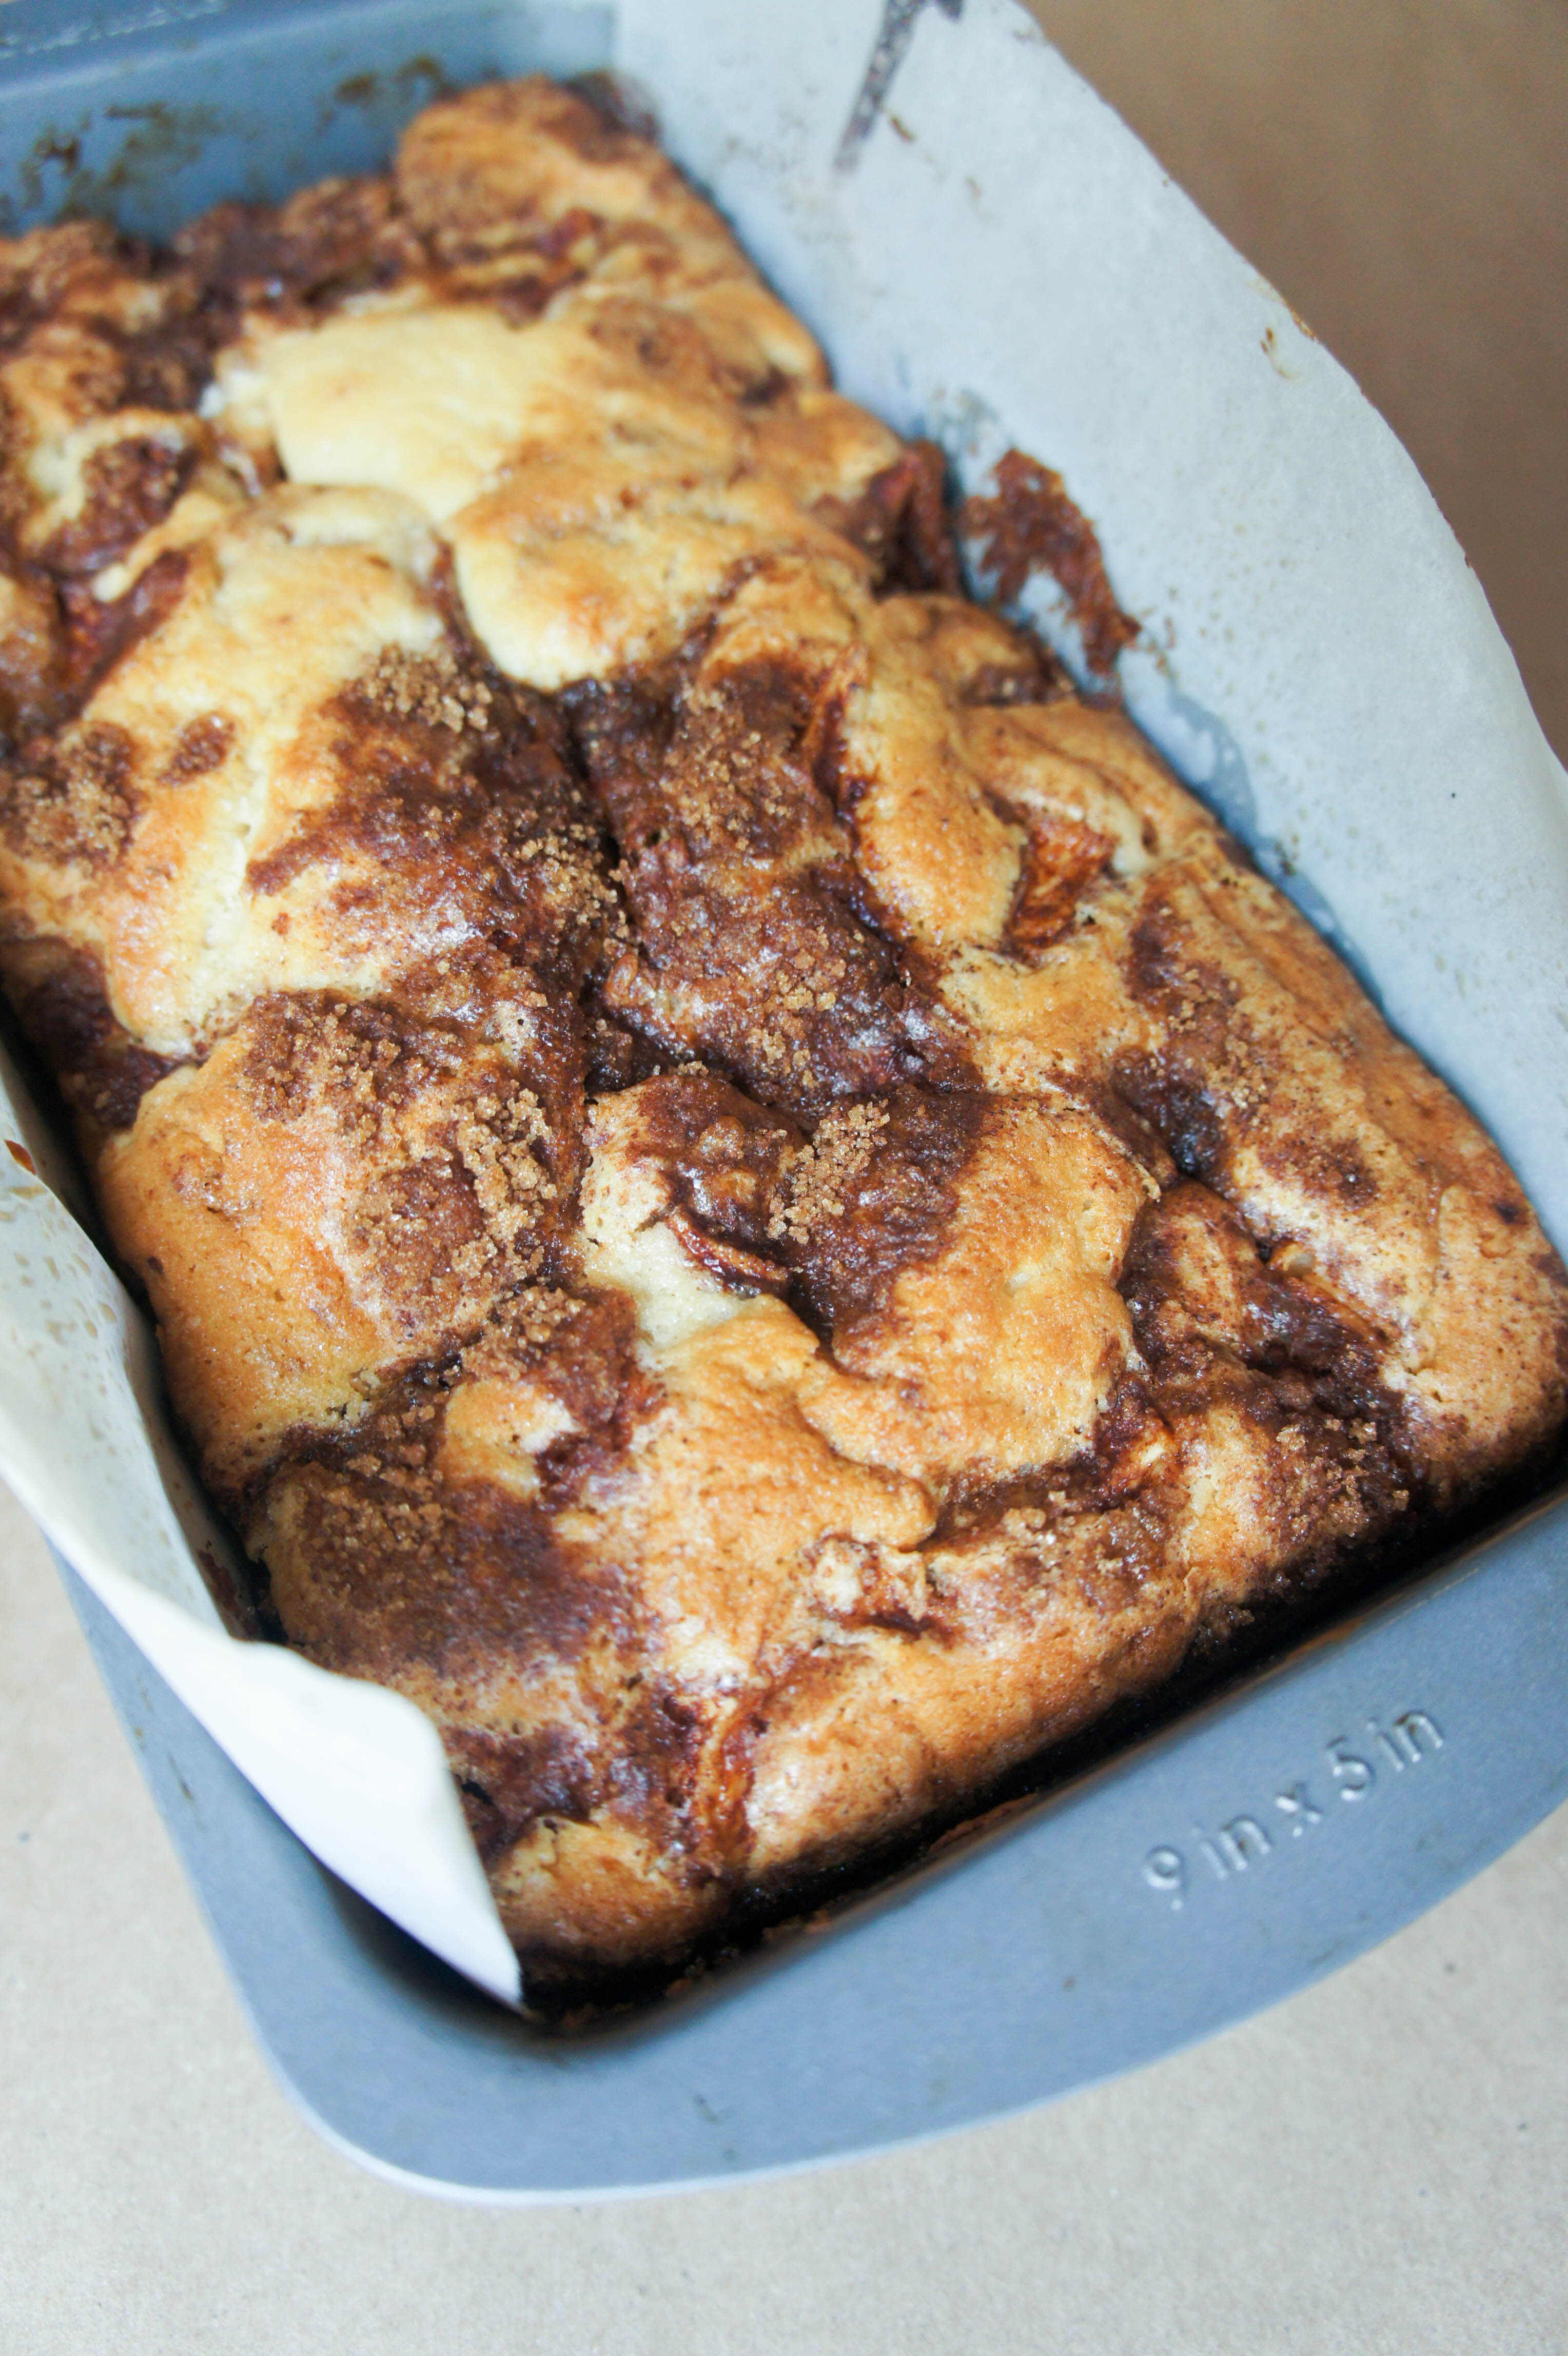 Fall Harvest Apple Bread is the perfect treat for a chilly evening. Serve on Thanksgiving with family or as a baked goods gift!